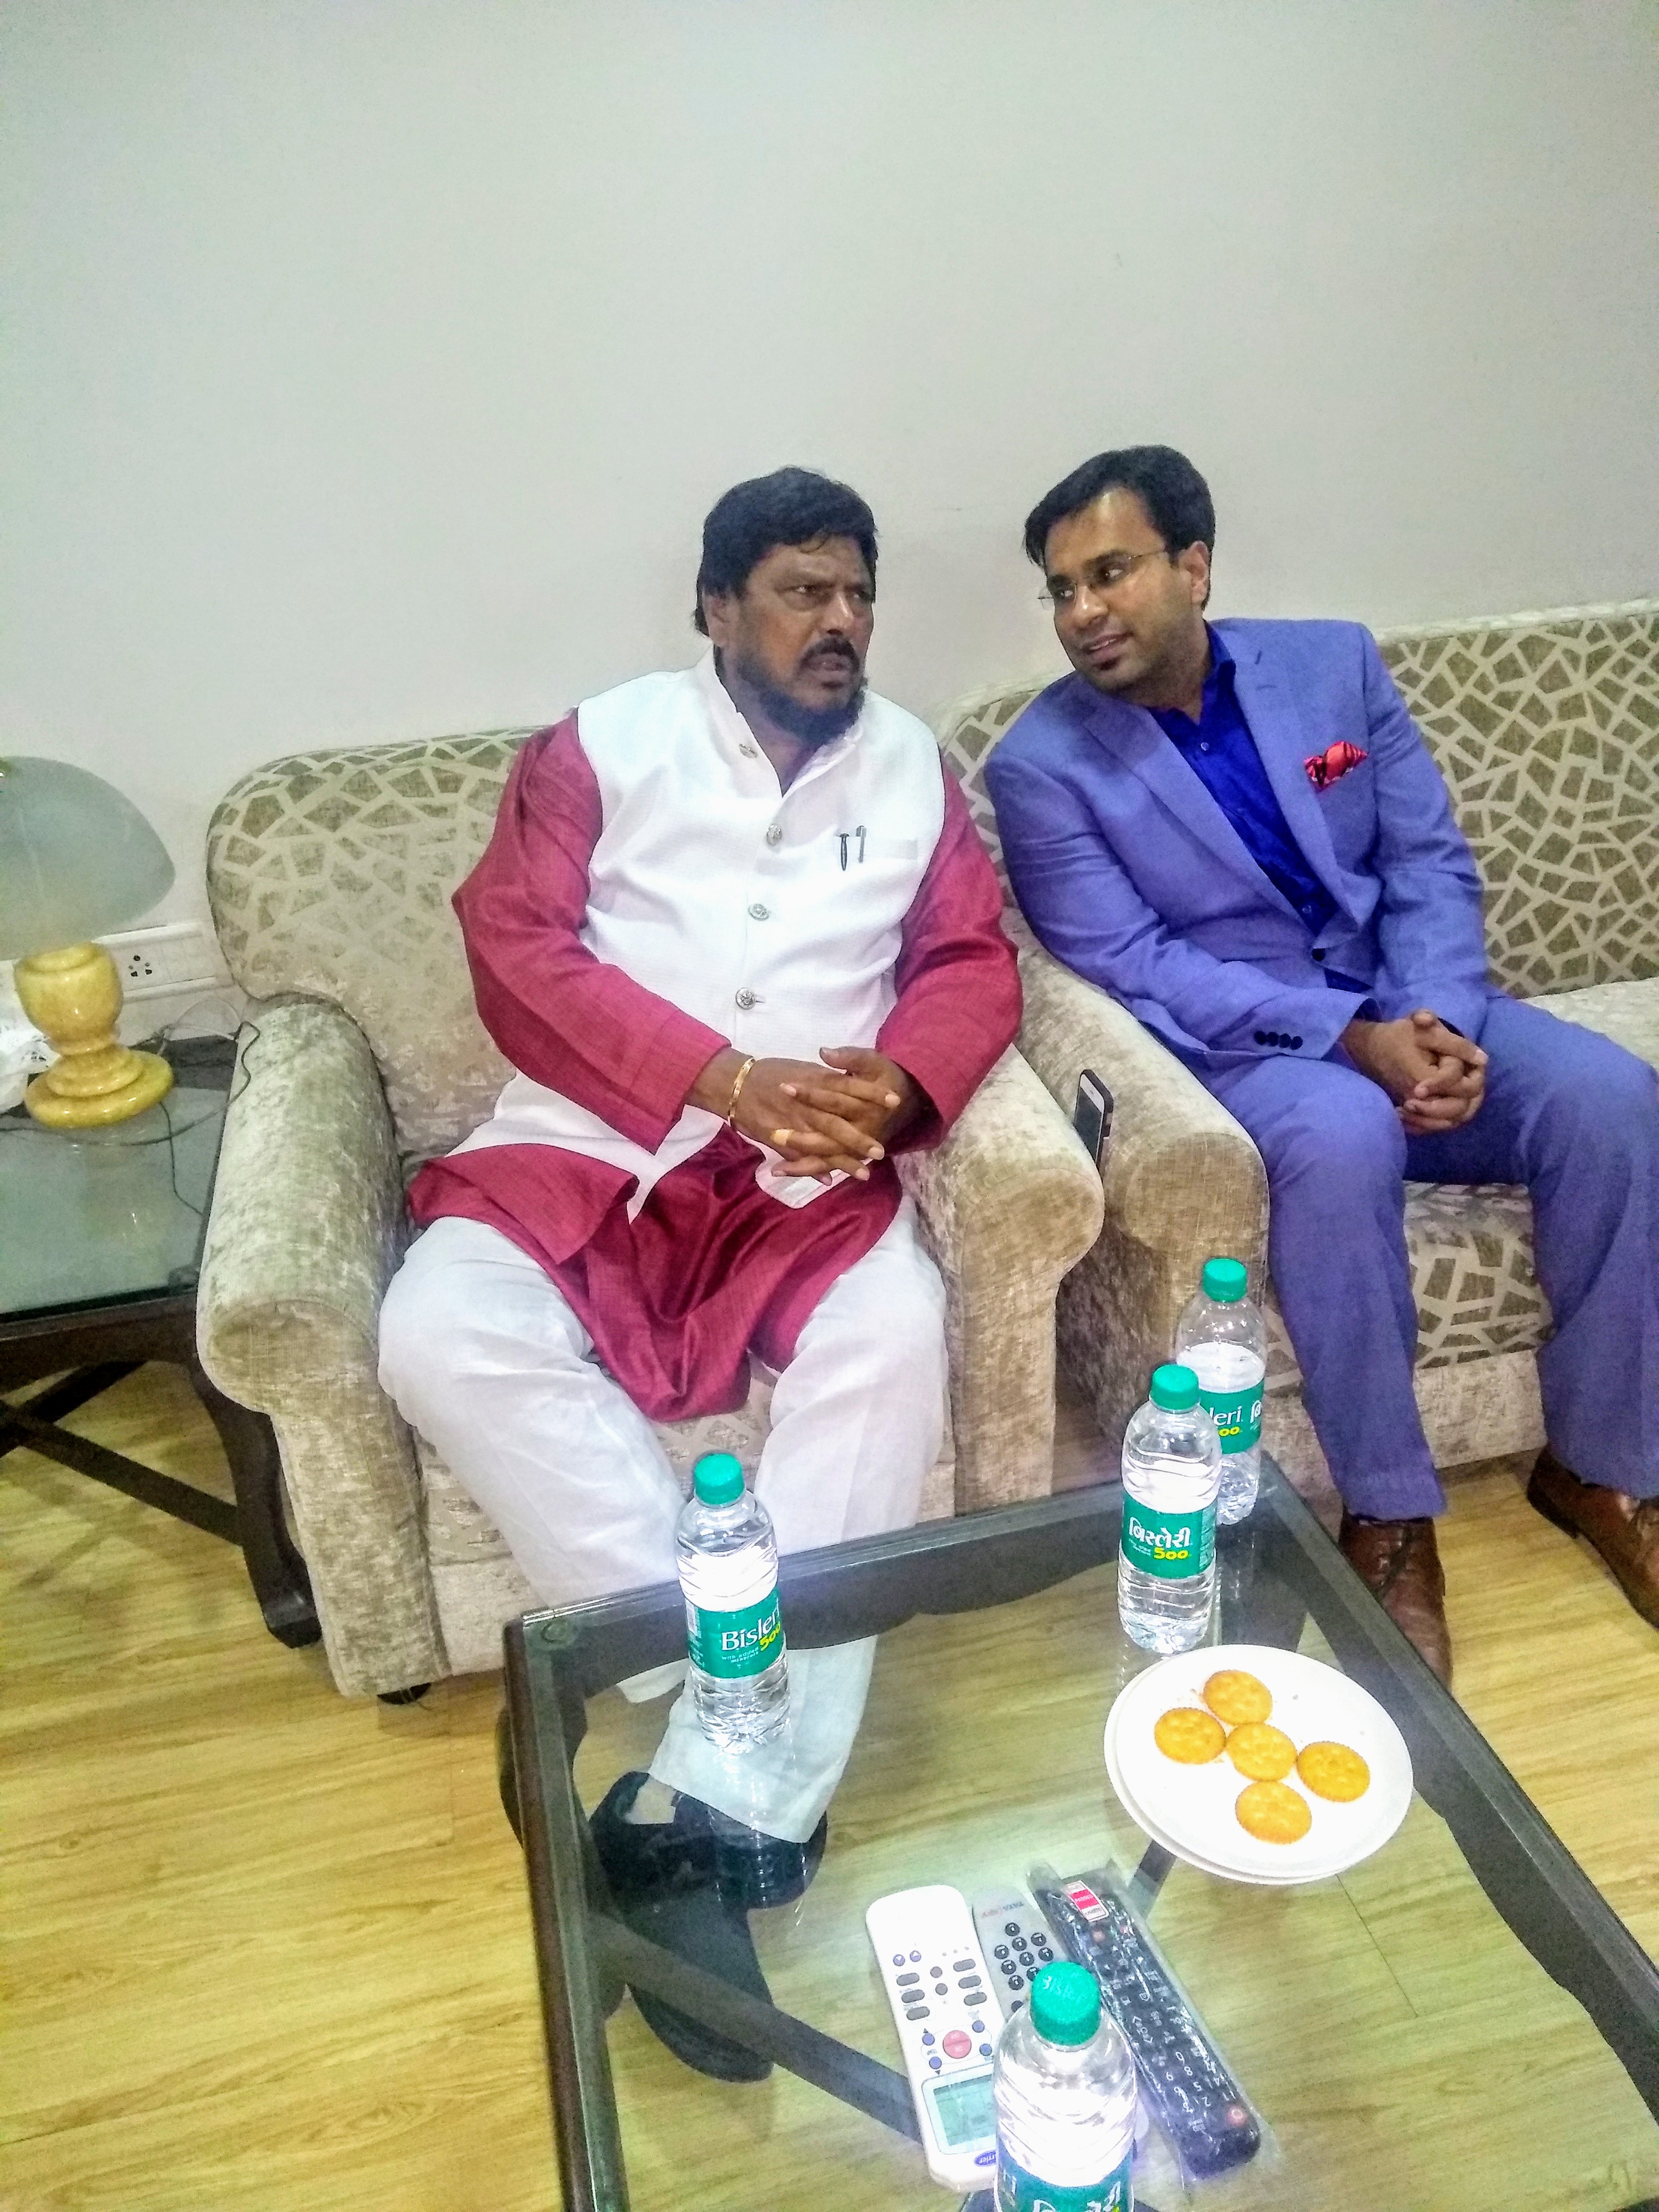 Dr.-Debraj-Shome-was-privileged-to-have-a-meeting-and-a-discussion-with-Union-Minister-of-State-for-Social-Justice-and-Empowerment-Shri-Ramdas-Athawale-ji-on-27th-November-2018-at-Mumbai